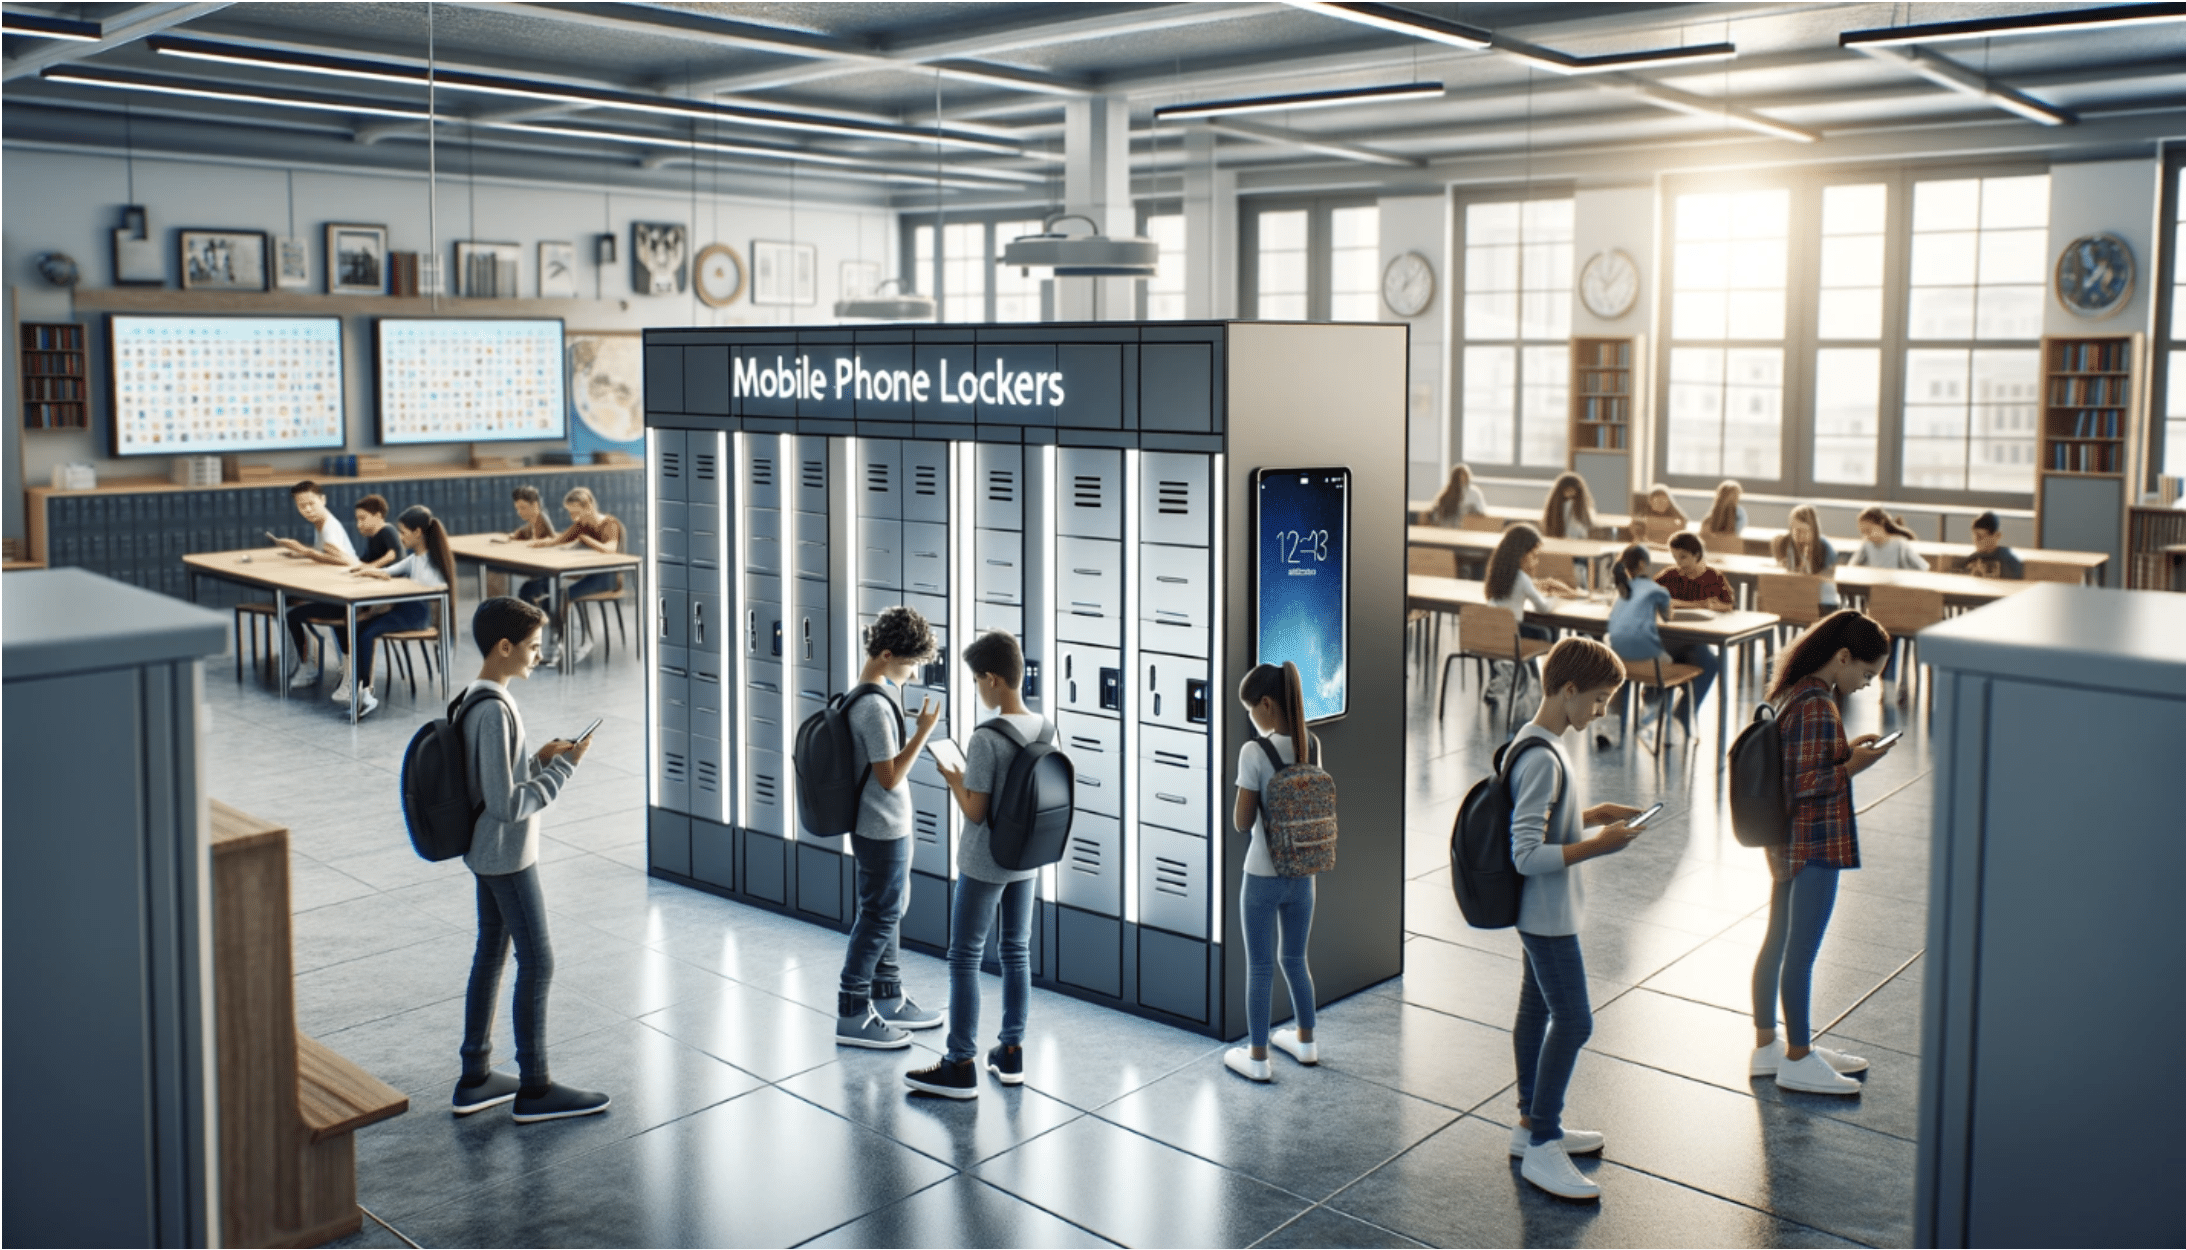 Group of mobile phone lockers